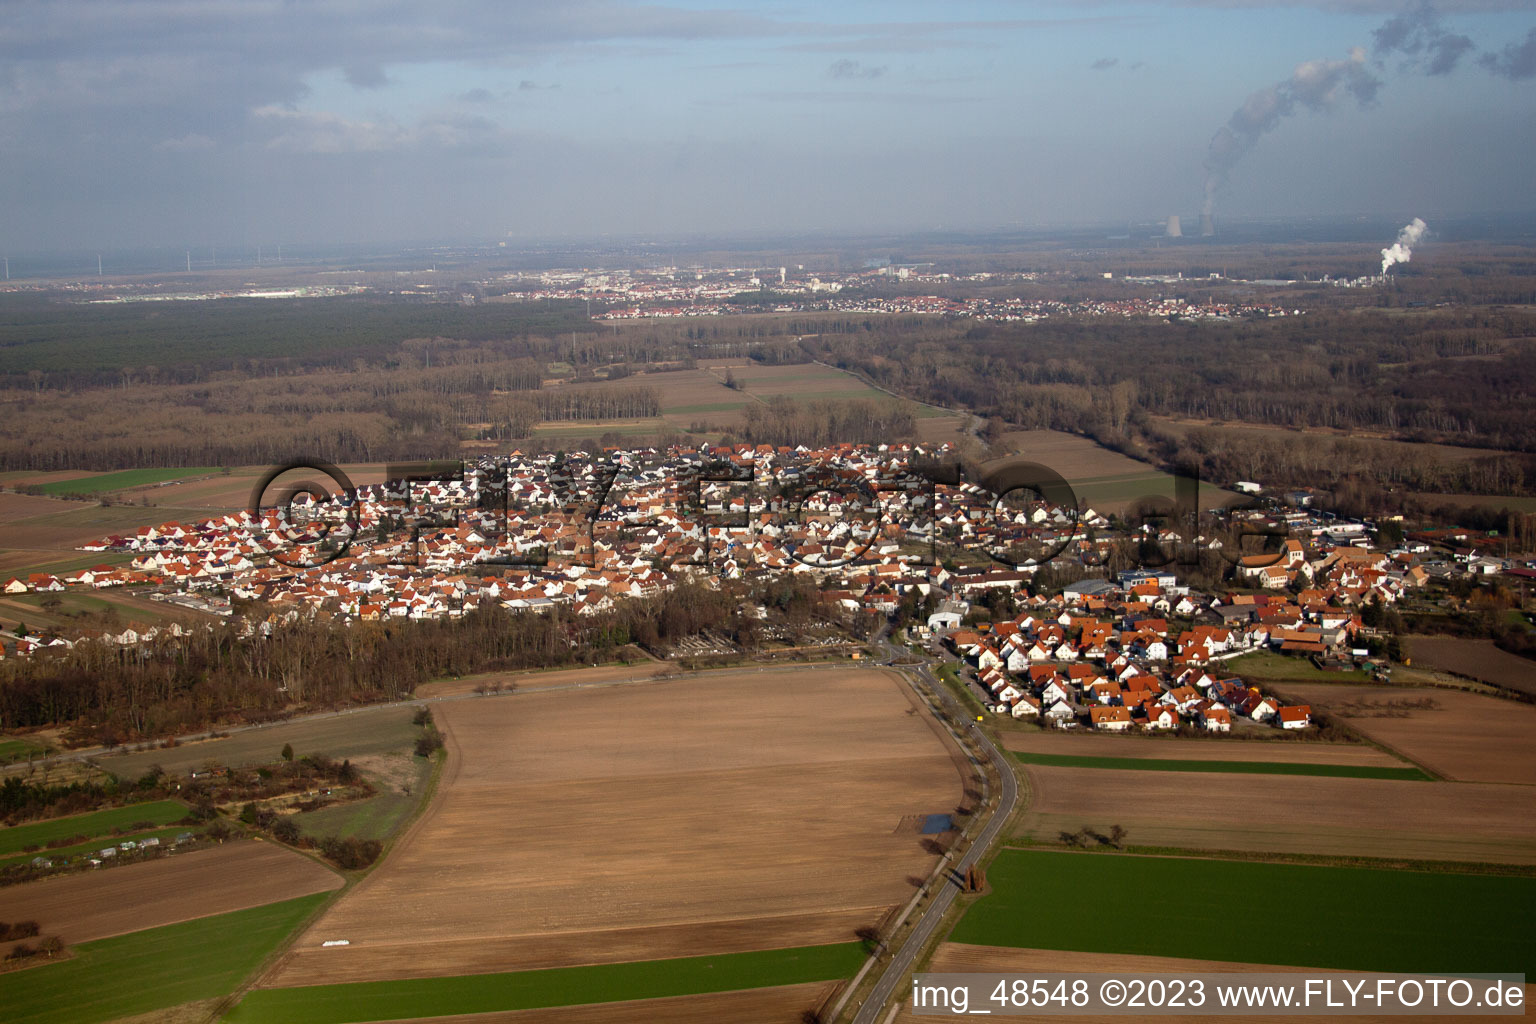 Hördt in the state Rhineland-Palatinate, Germany from above